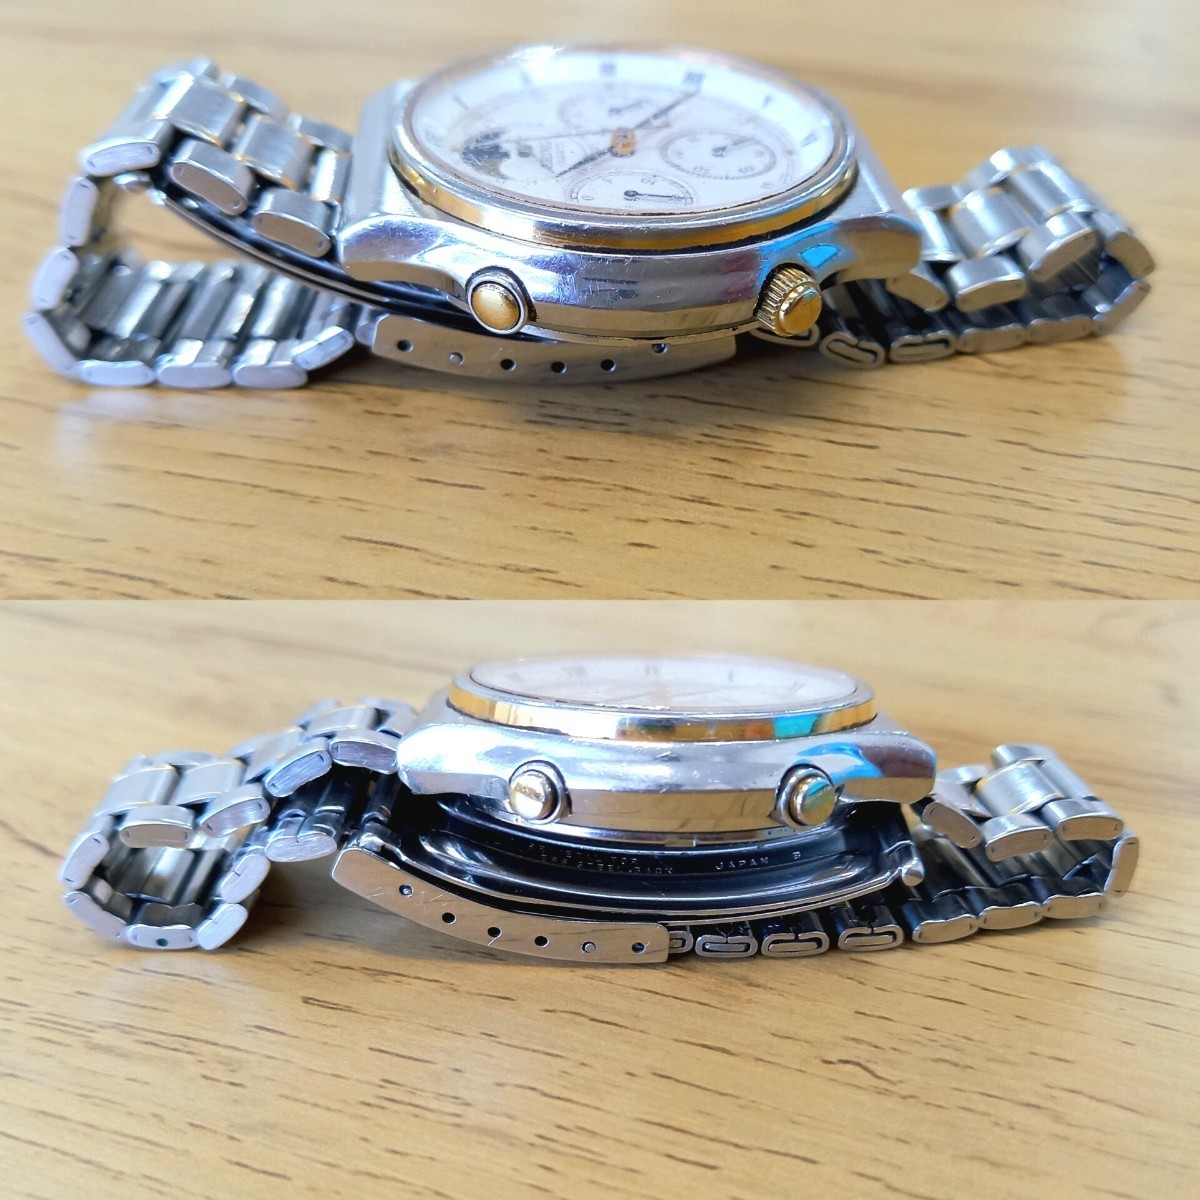 ★ SEIKO★セイコー★クオーツ★クルージング★7A48-7000 (A5)QZ★ムーンフェイズ ★クロノグラフ★ジャンク★稼働品★_画像4